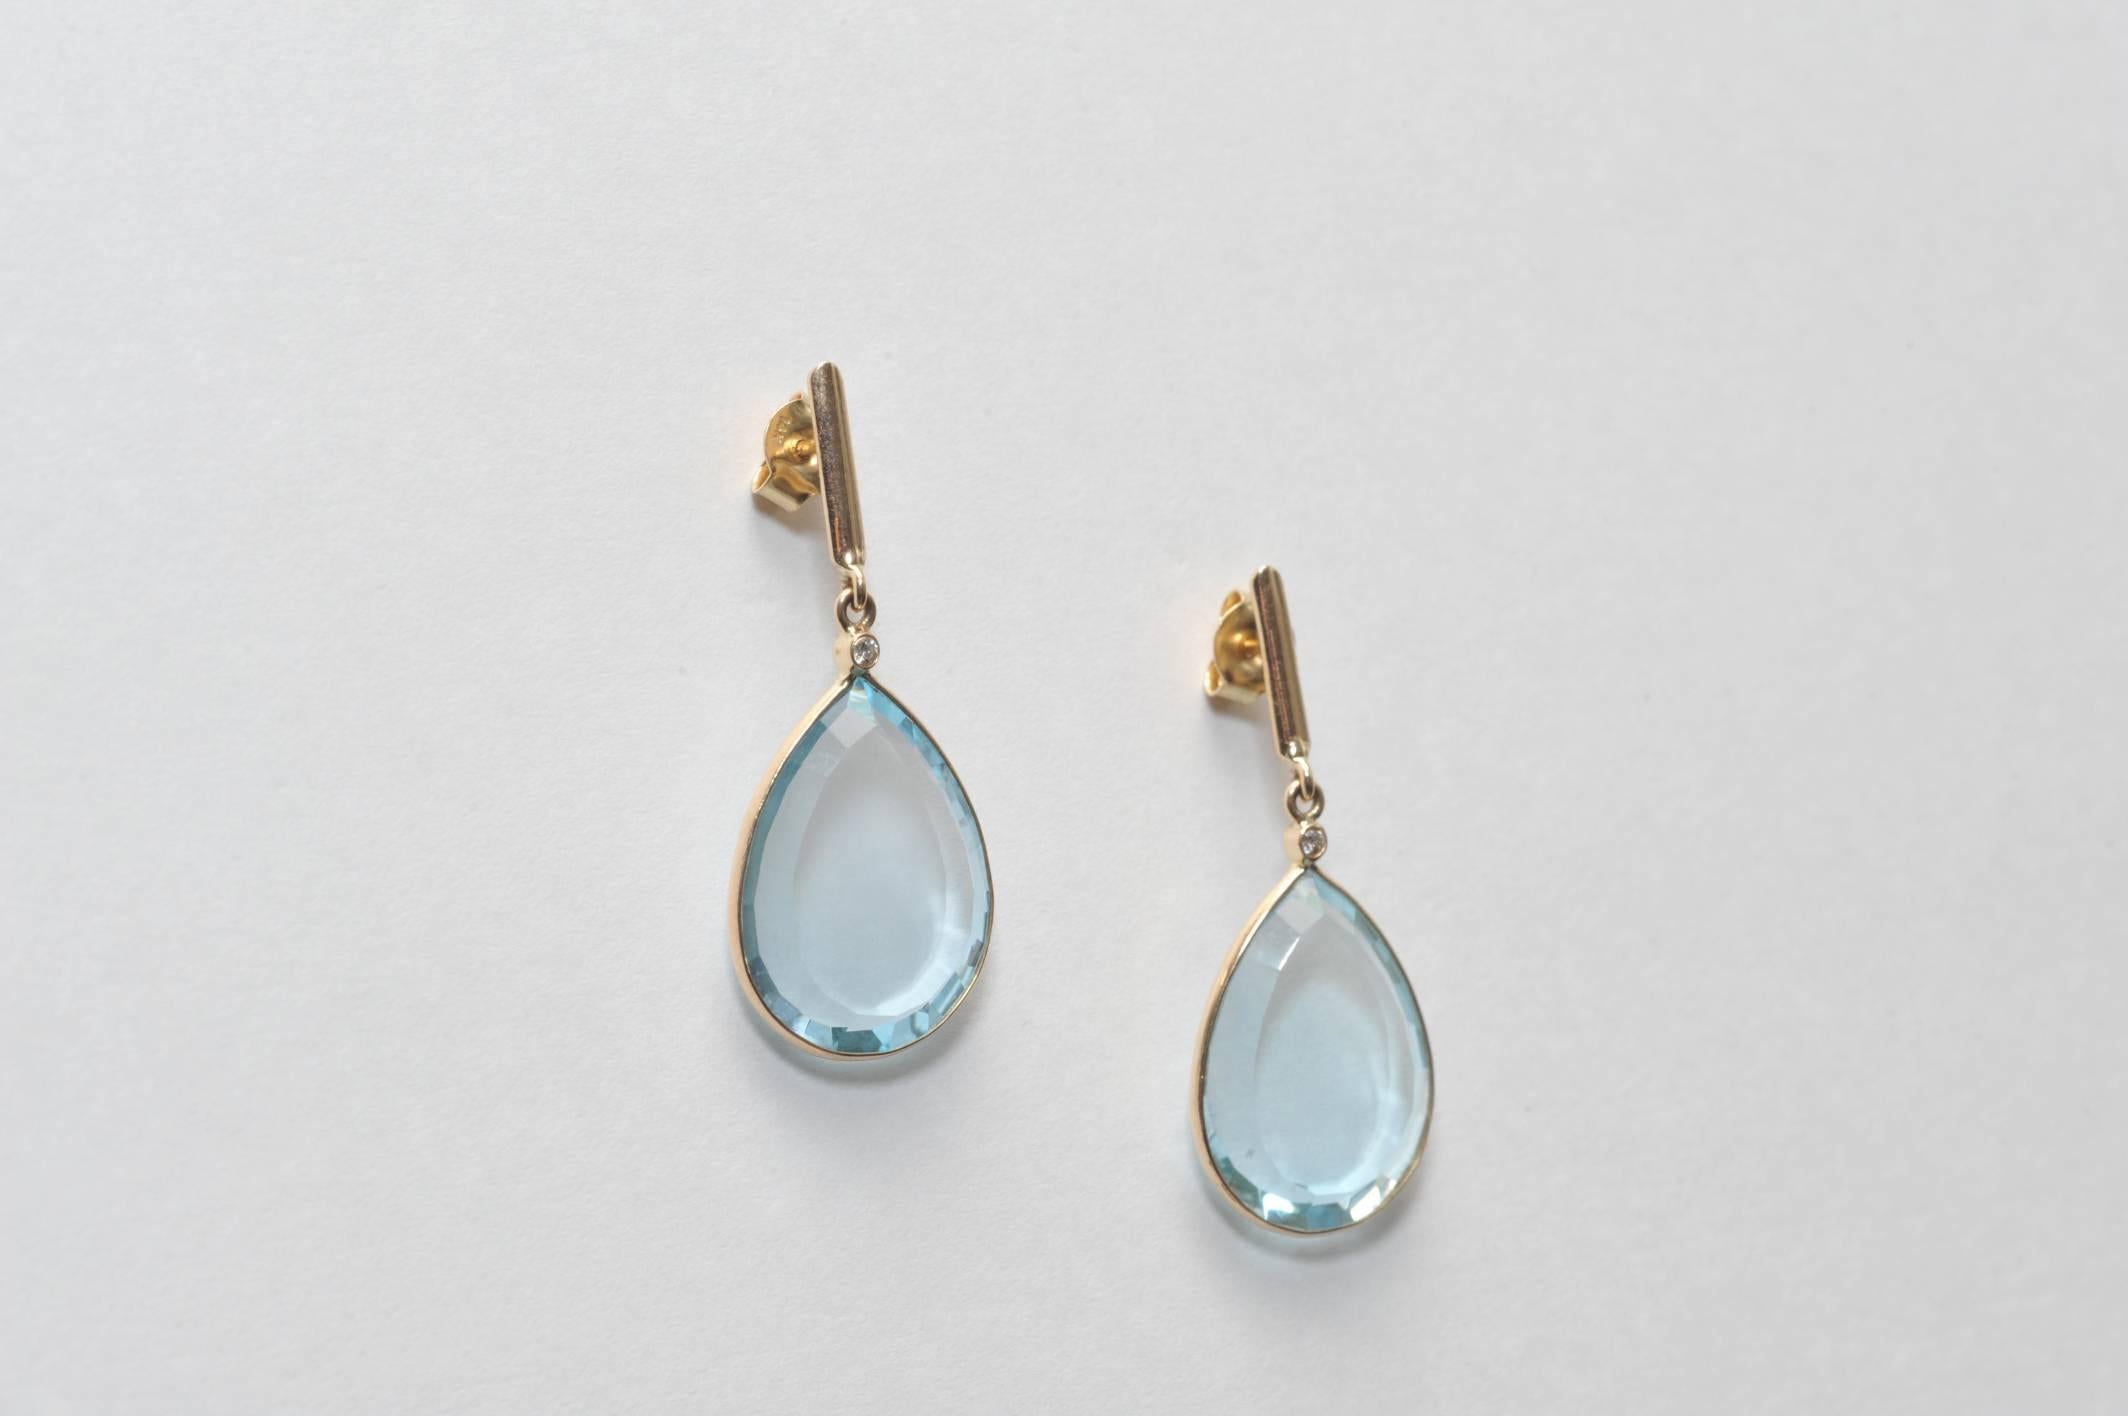 Pair of lovely pear-shaped aquamarines with bevel-cut edges set in 18K  gold and faceted diamond at the top.  For pierced ears.  Carat weight of the aquamarines is 24.34.  Classic style.
